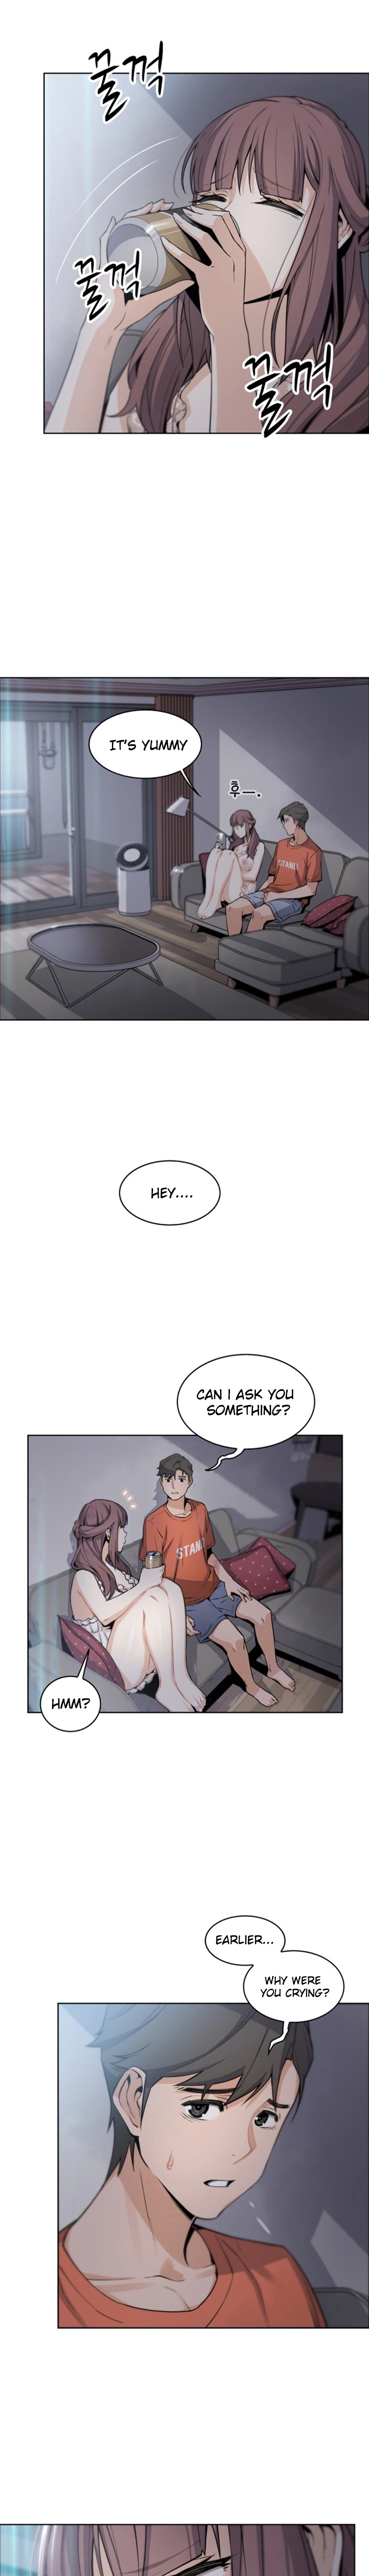 Housekeeper Manhwa - Chapter 11 Page 3